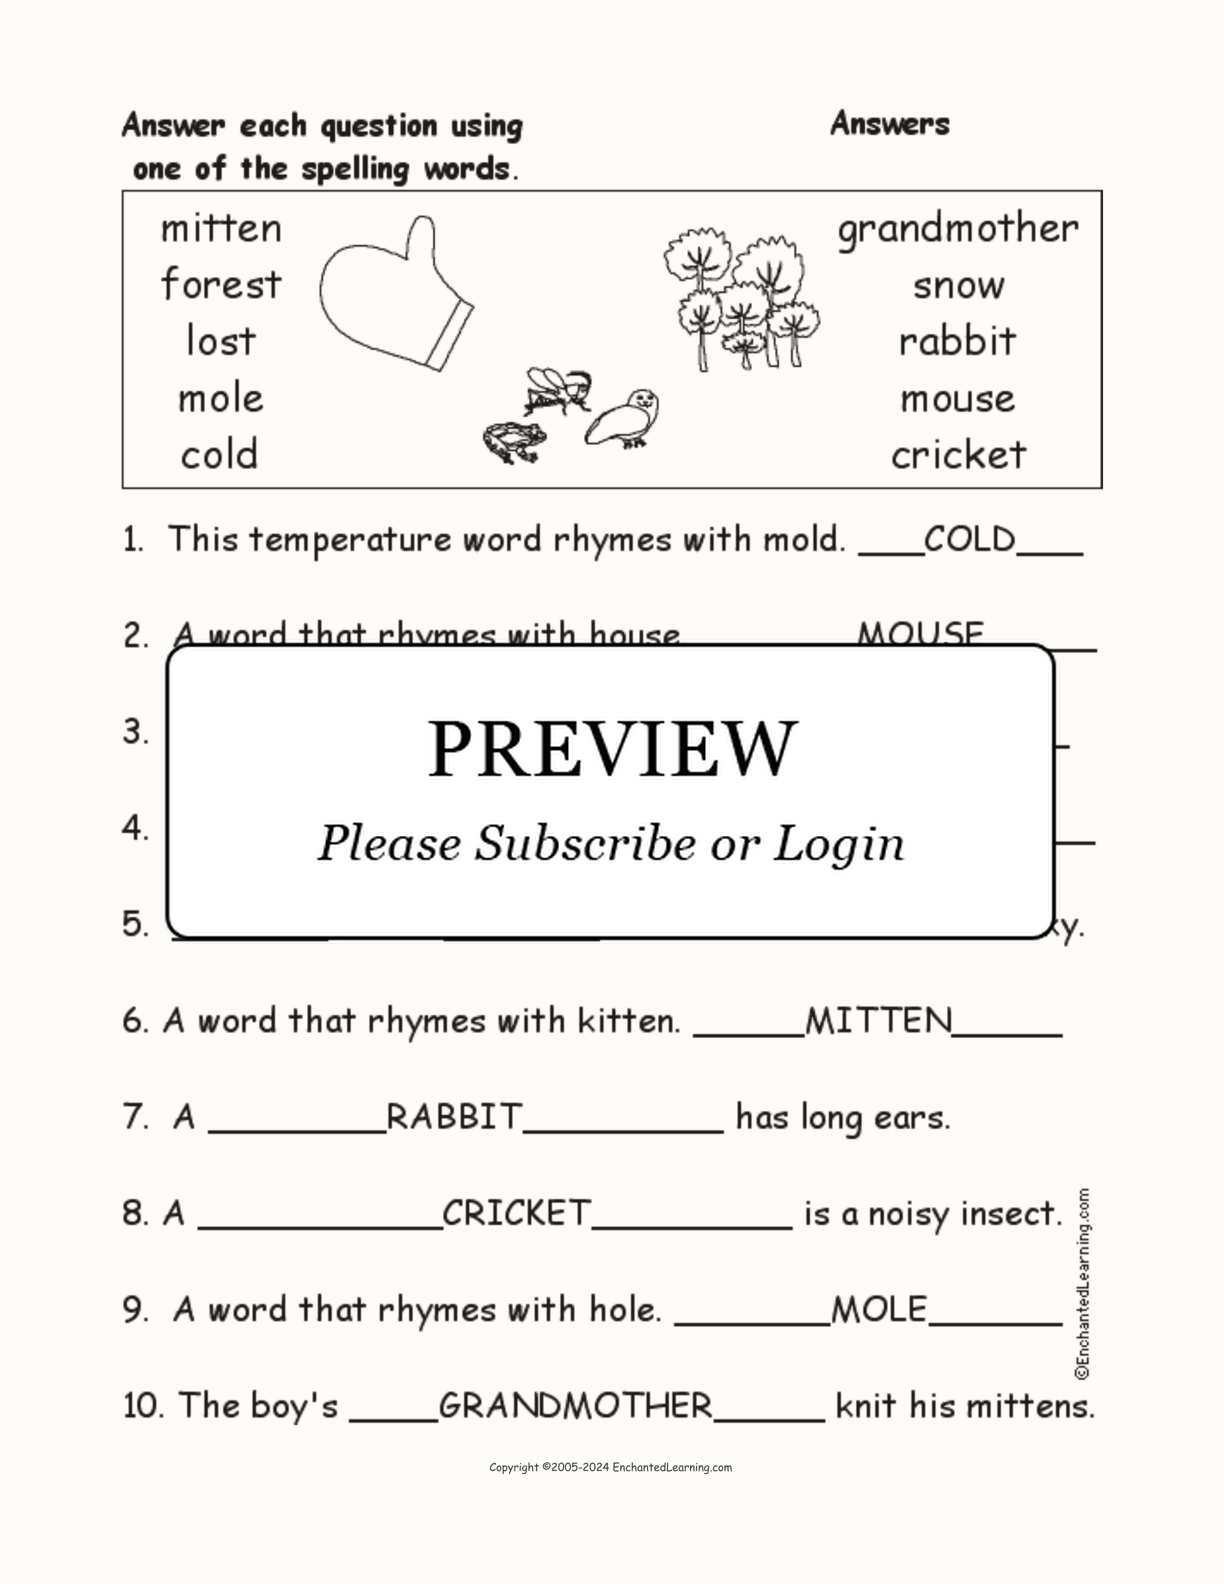 'The Mitten' Spelling Word Questions interactive worksheet page 2